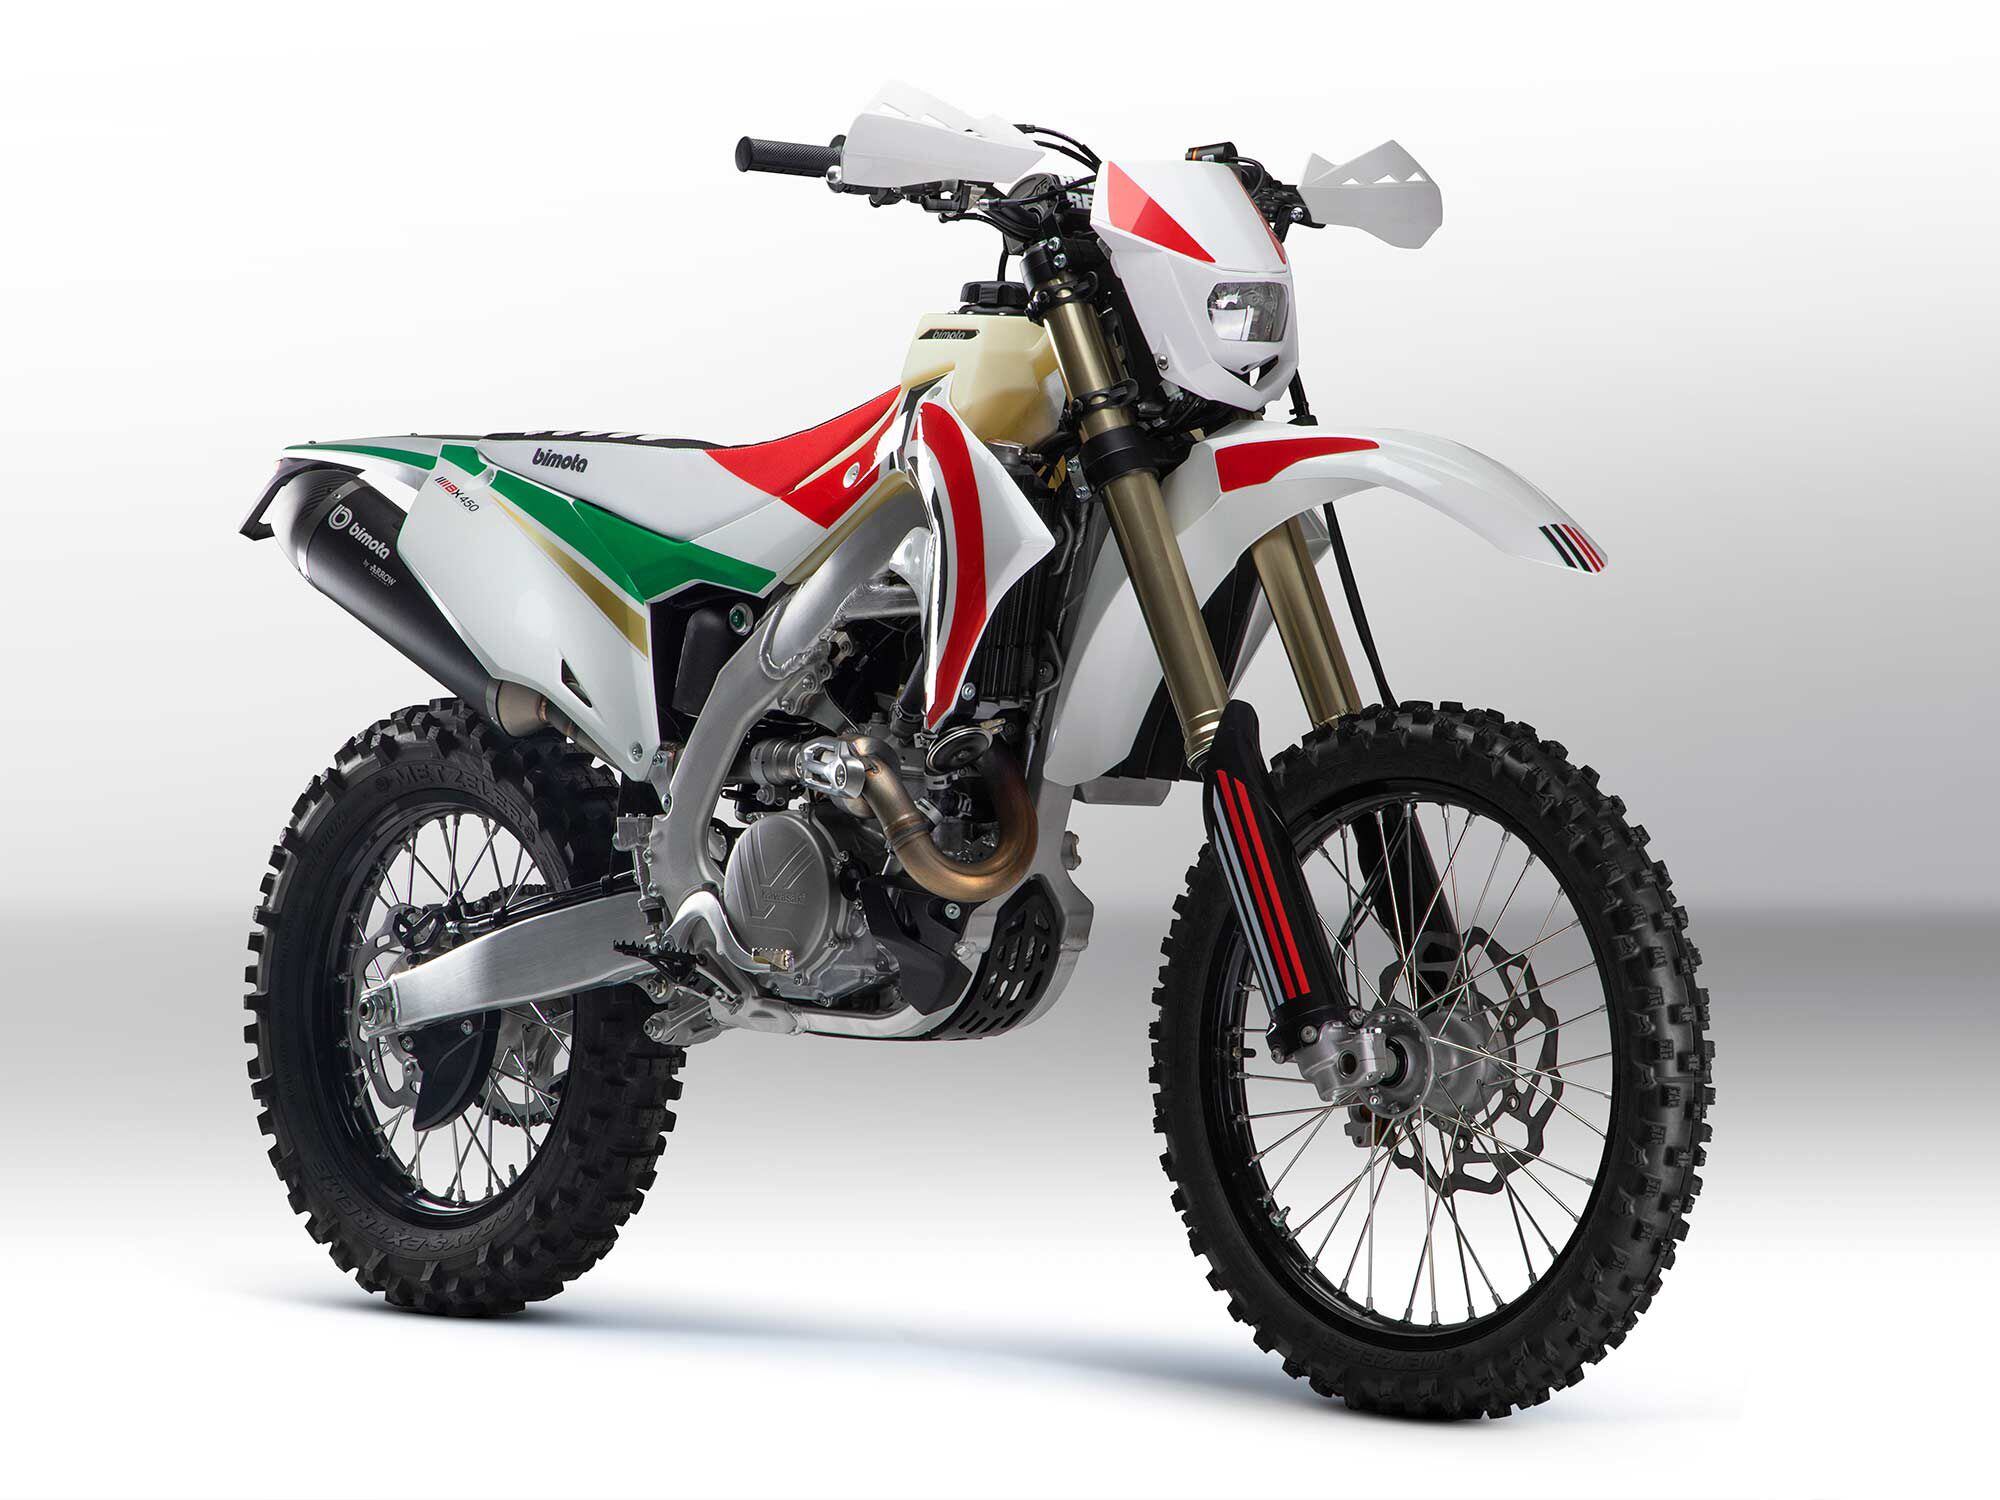 Think Bimota only makes streetbikes? Meet the new Bimota BX450, the company’s first foray into the off-road world.